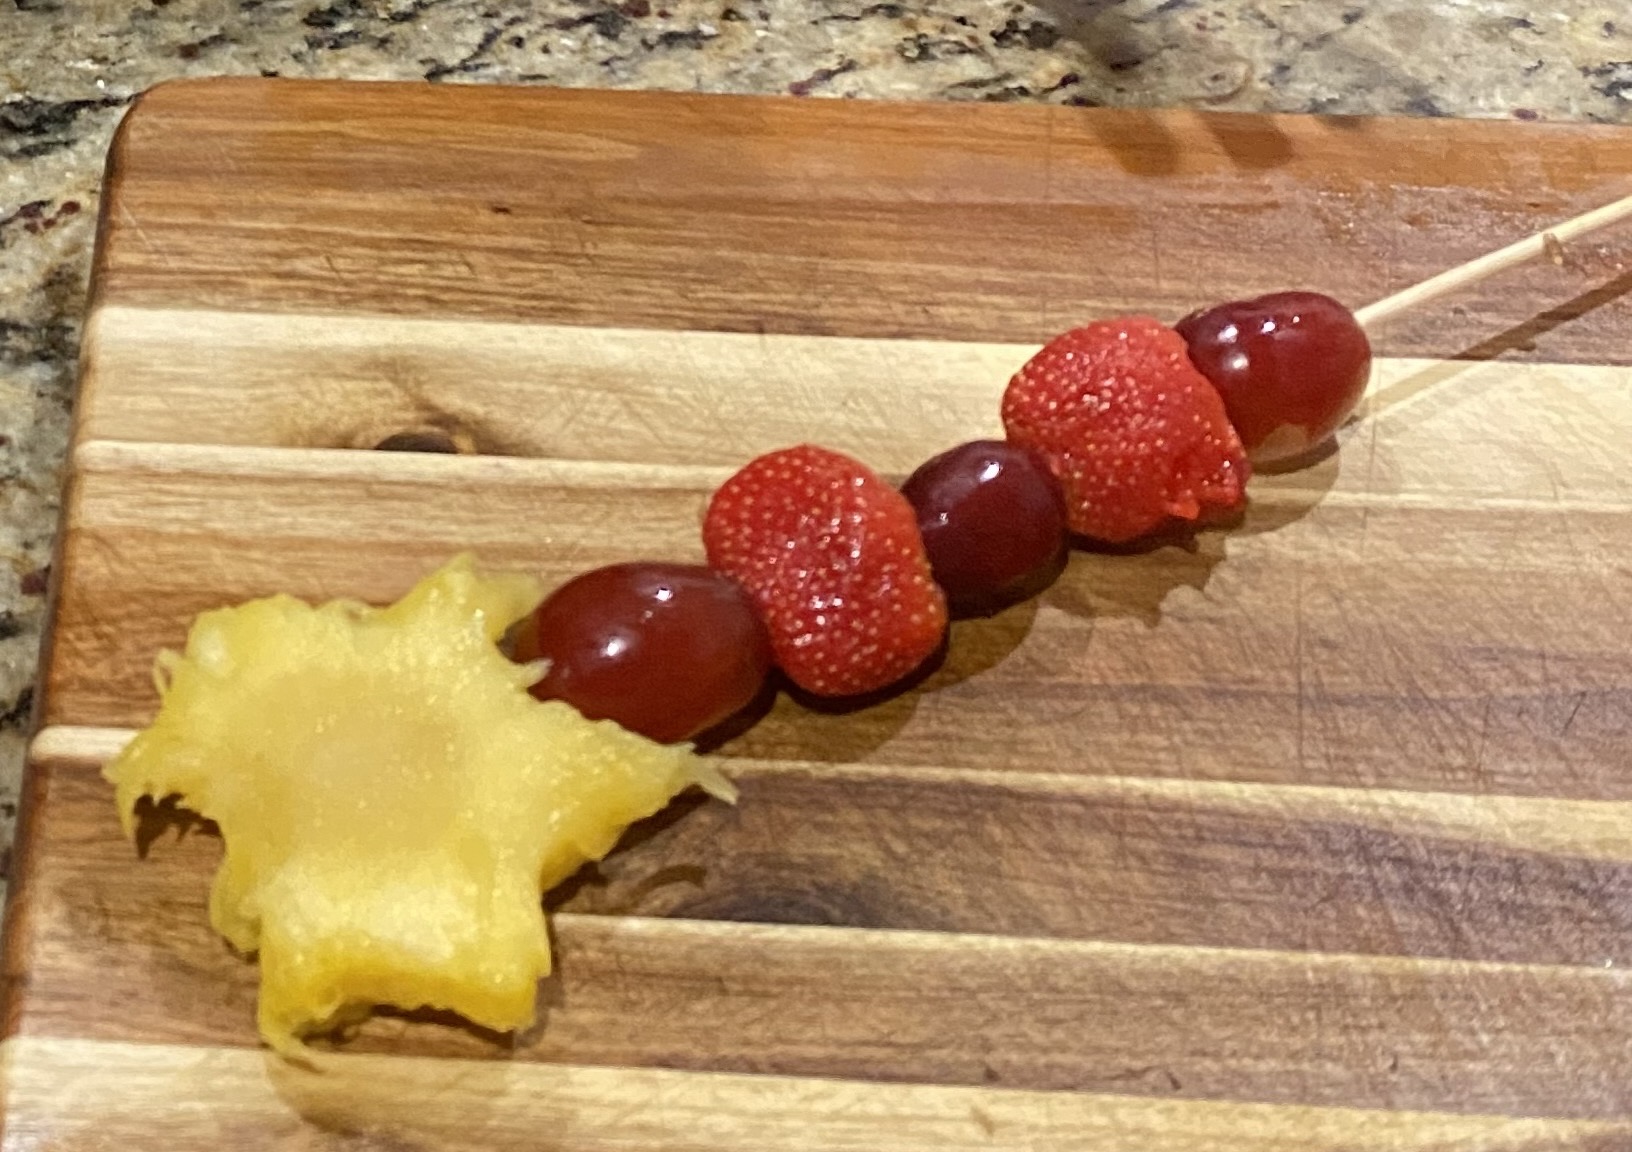 Fruit wand made from pineapple star, watermelon, and grapes